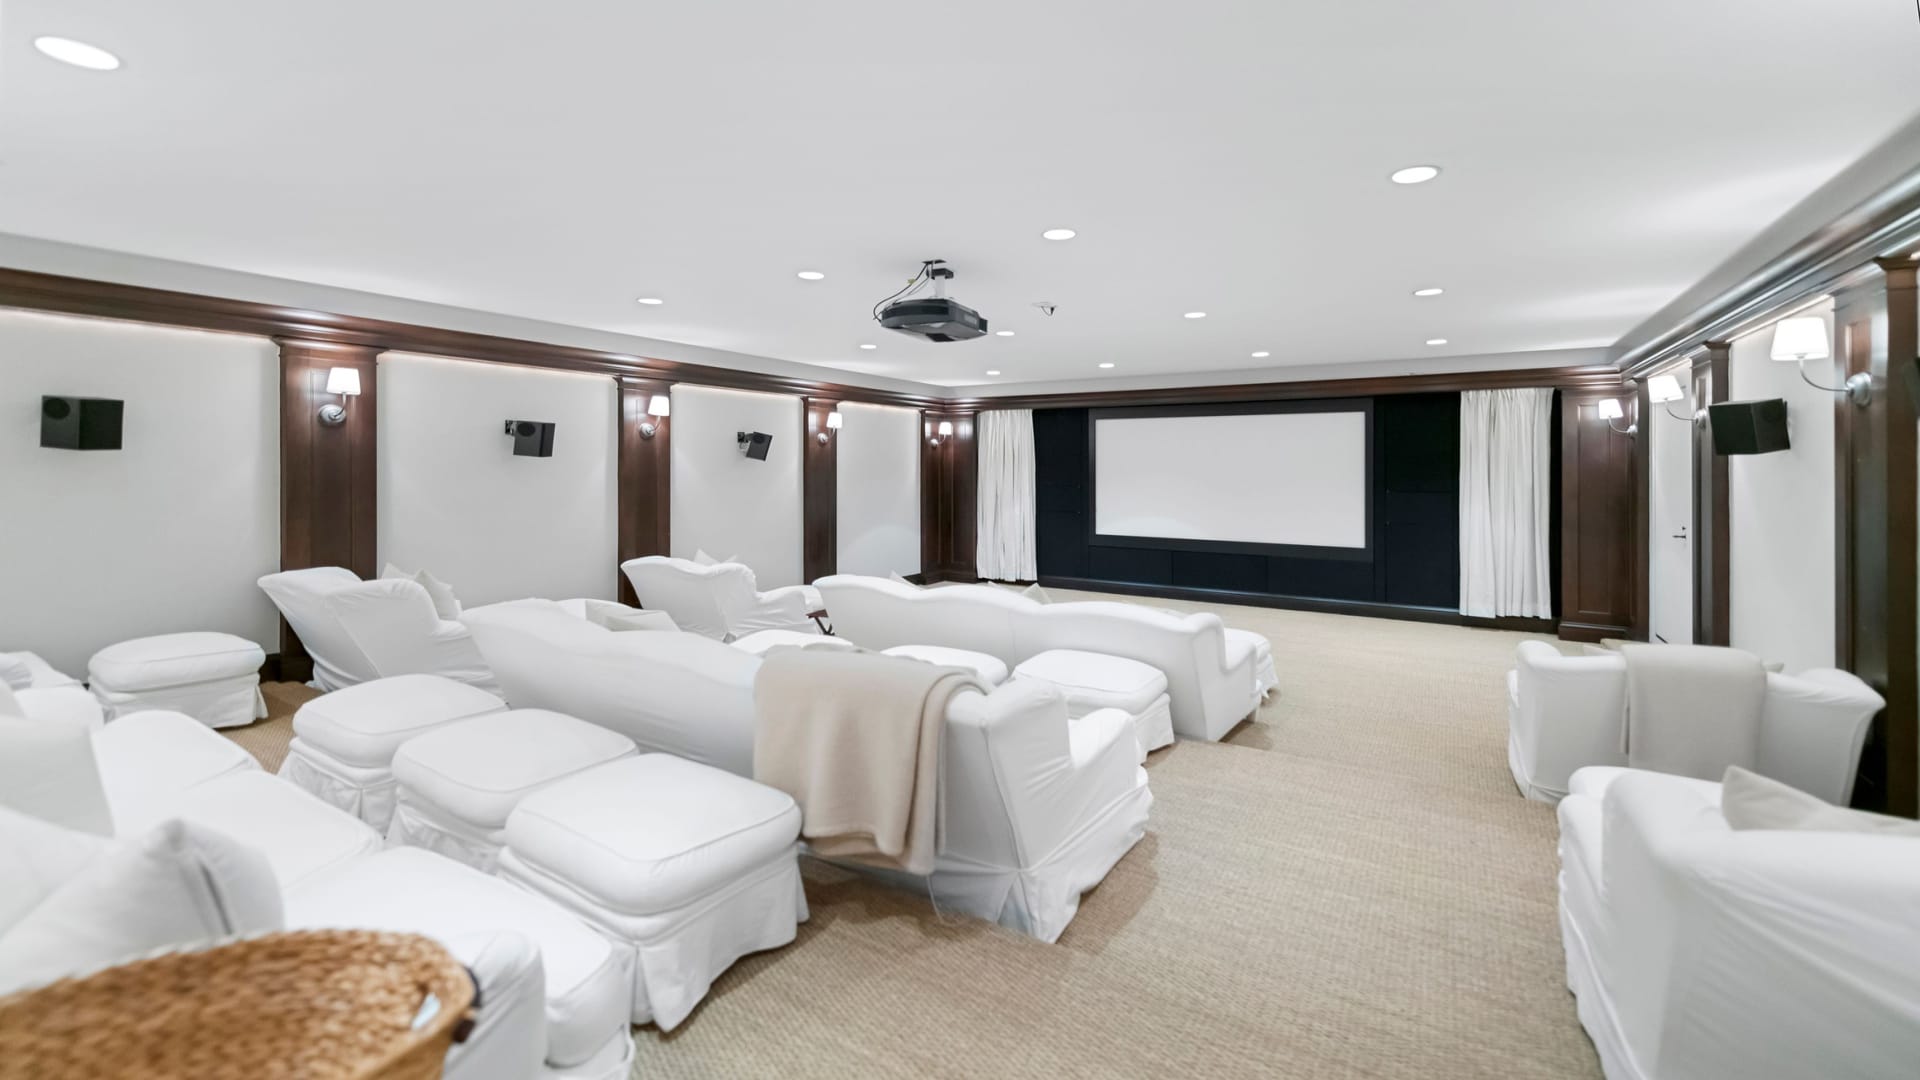 Home theater in the second residence.